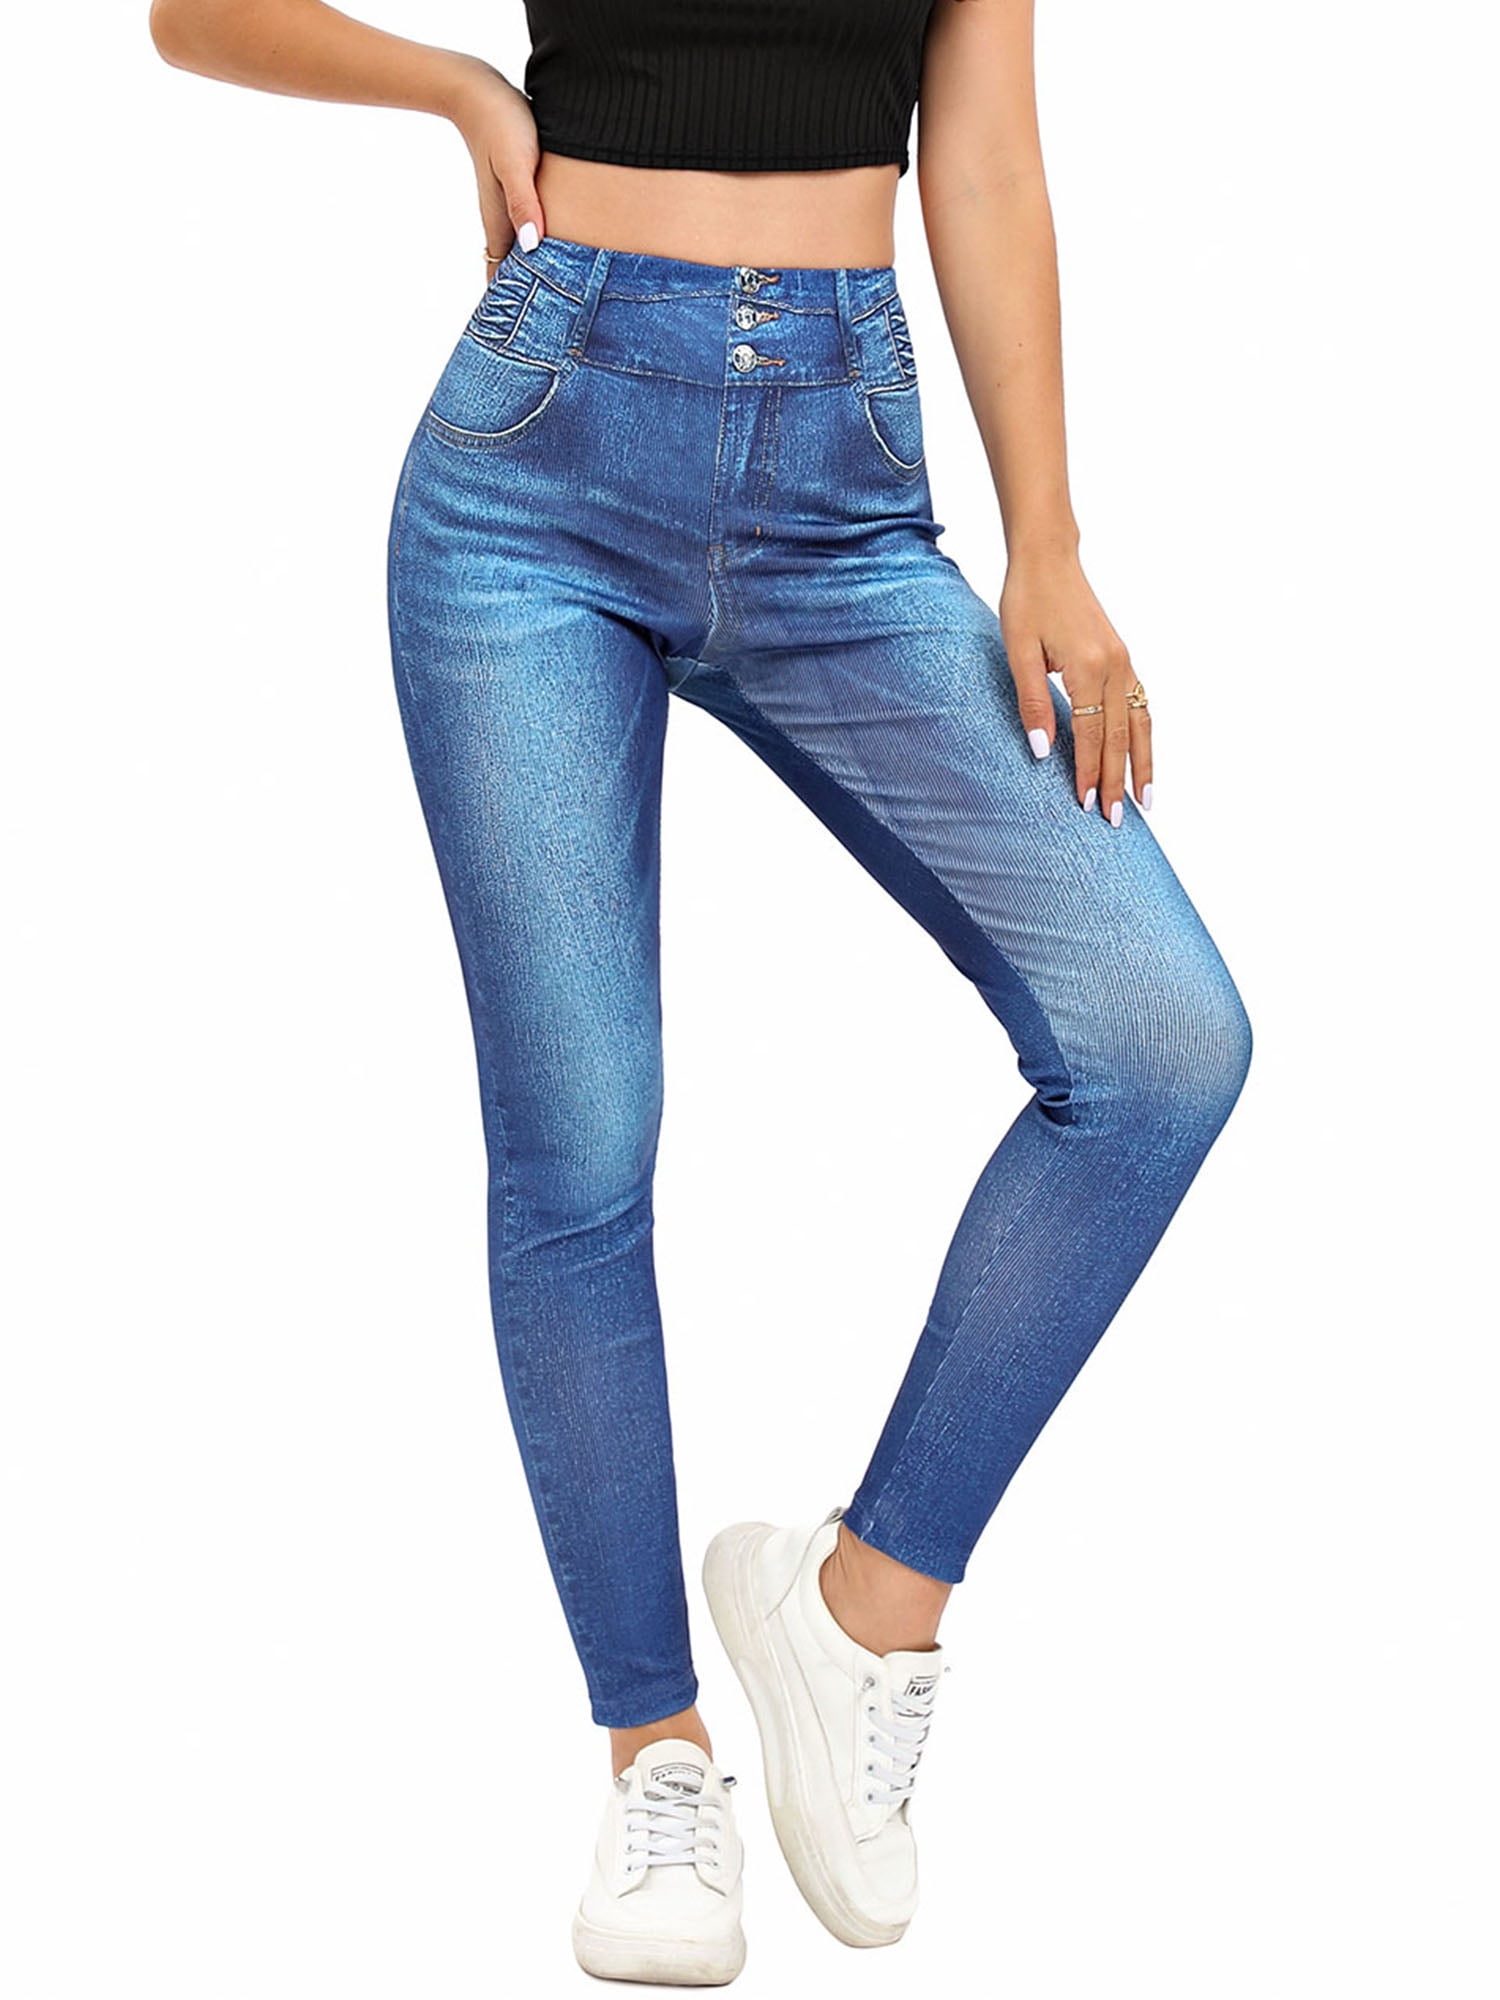 Frontwalk Jean Leggings for Women Printed Denim High Waisted Yoga Pants  Stretch Jean Look Jeggings Tights Blue-D S